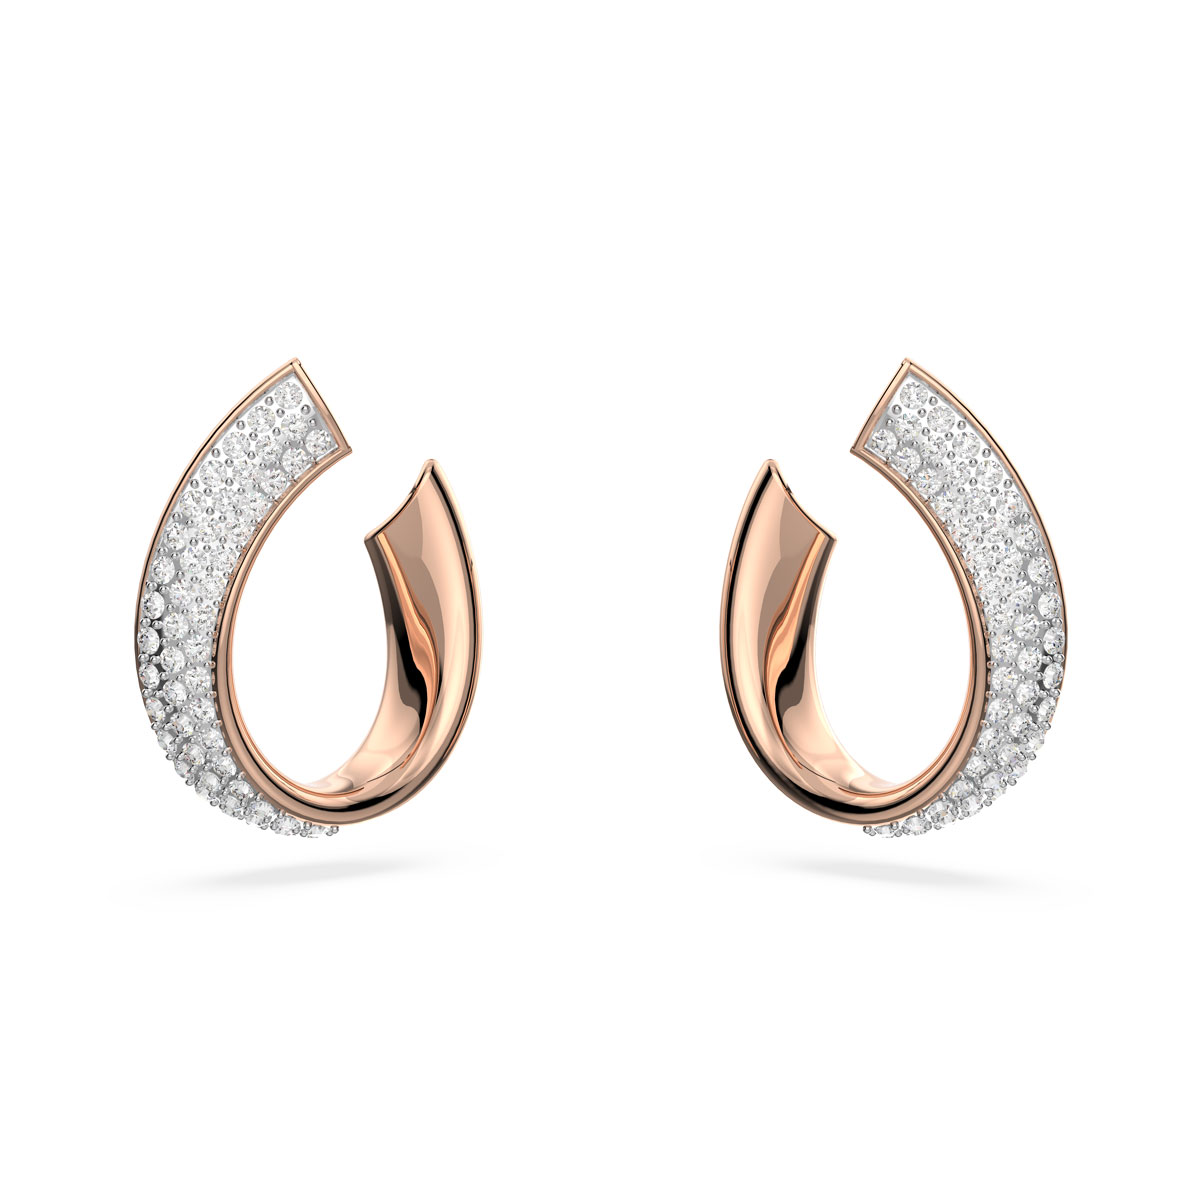 Swarovski Exist Hoop Earrings, Small, White, Gold-Tone Plated